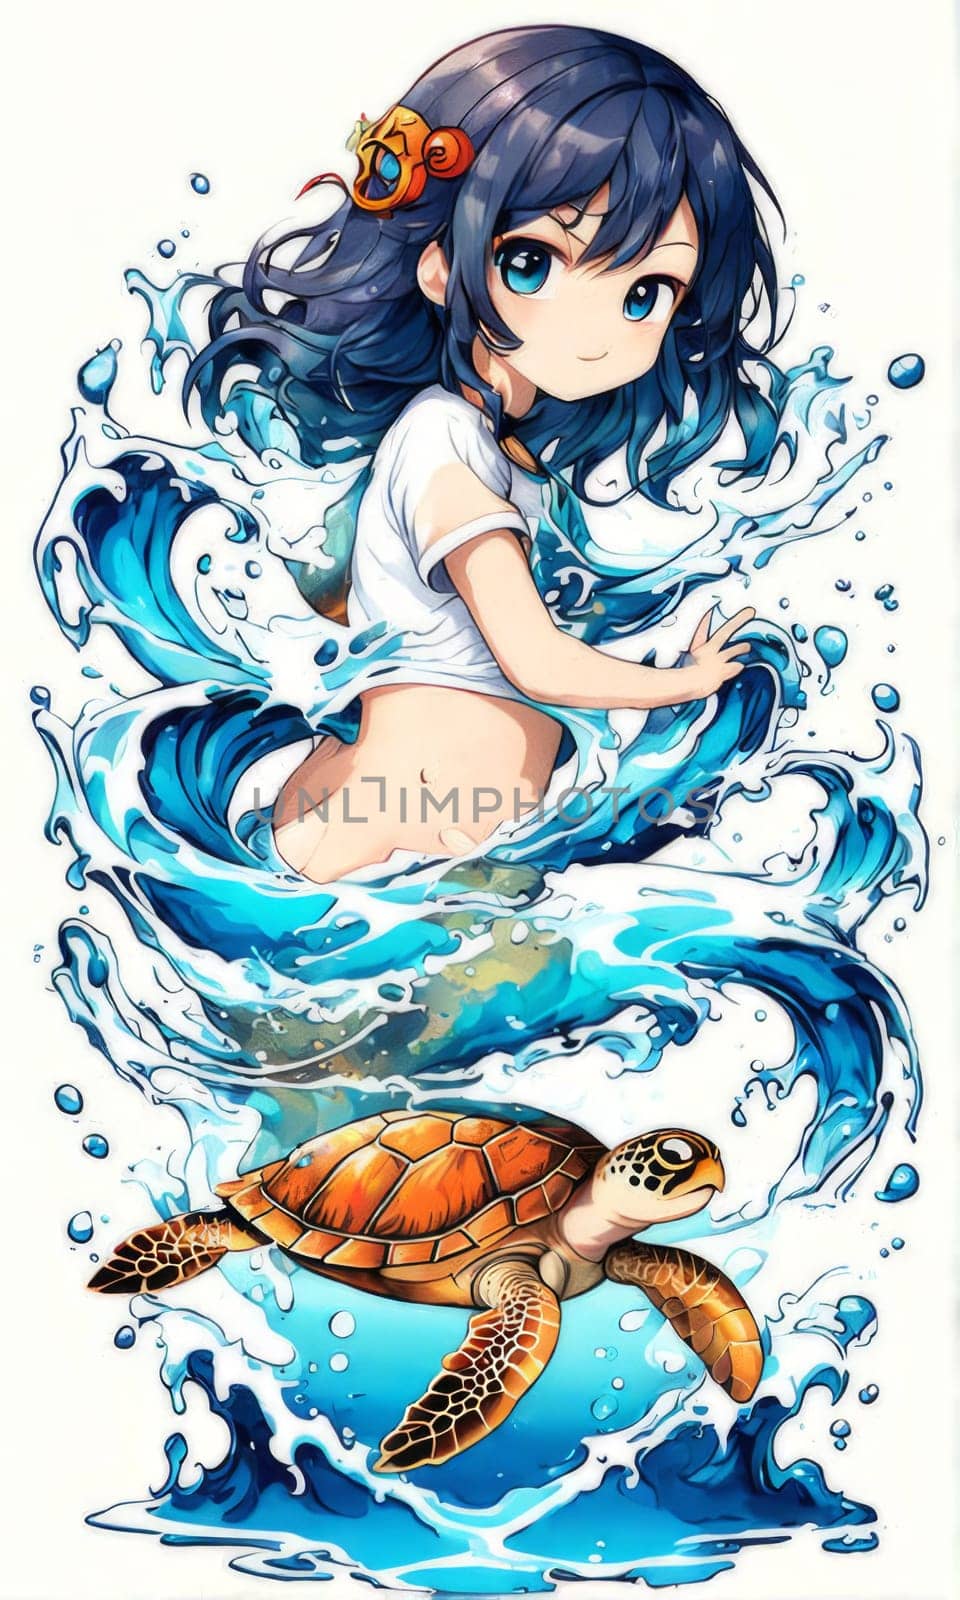 Lively and colorful cartoon girl with turtle. Irls expression exudes joy, vibrancy, suggesting carefree, whimsical atmosphere. For educational materials for kids, tourism, stationery, Tshirt design. by Angelsmoon